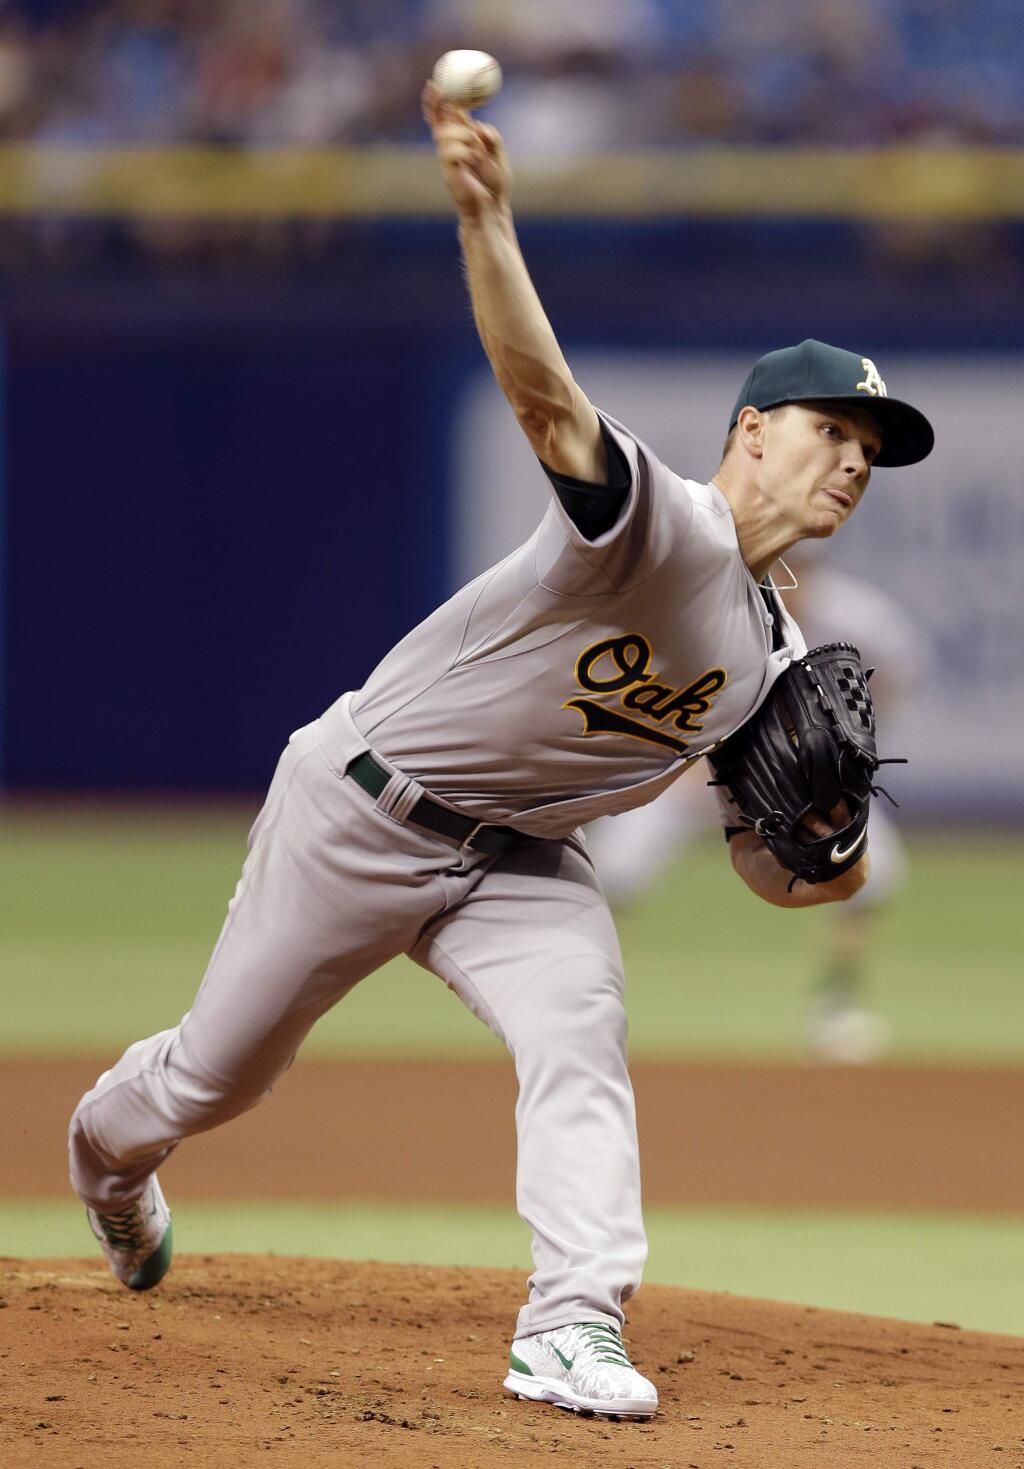 Oakland Athletics starting pitcher Sonny Gray delivers to the Tampa Bay Rays during the first inning of a baseball game Sunday, May 24, 2015, in St. Petersburg, Fla. (AP Photo/Chris O'Meara)